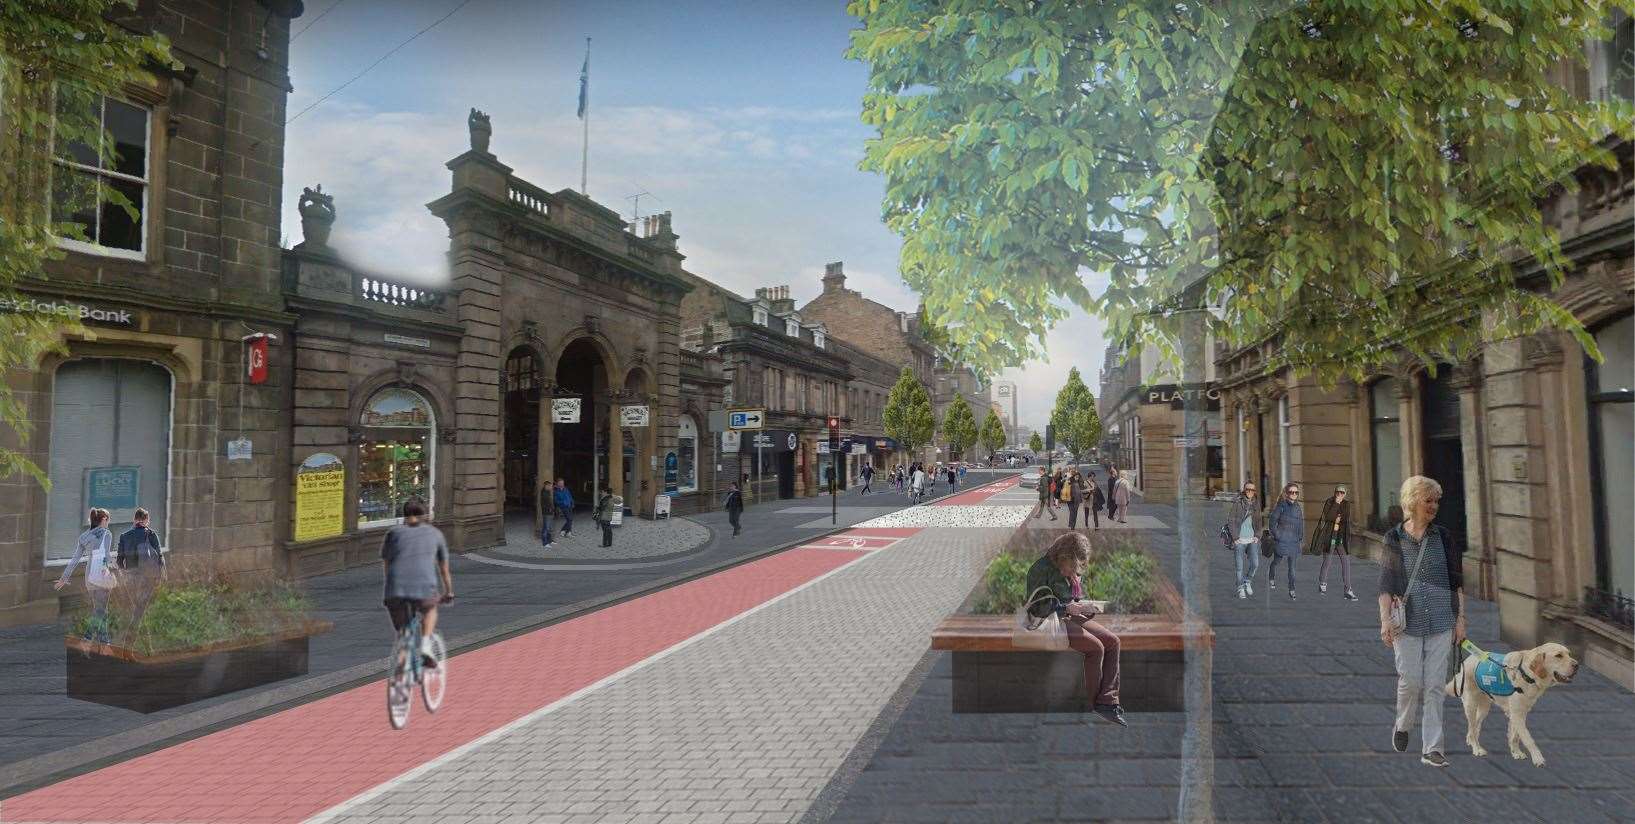 Consultations are continuing on proposals to bring change to Academy Street.